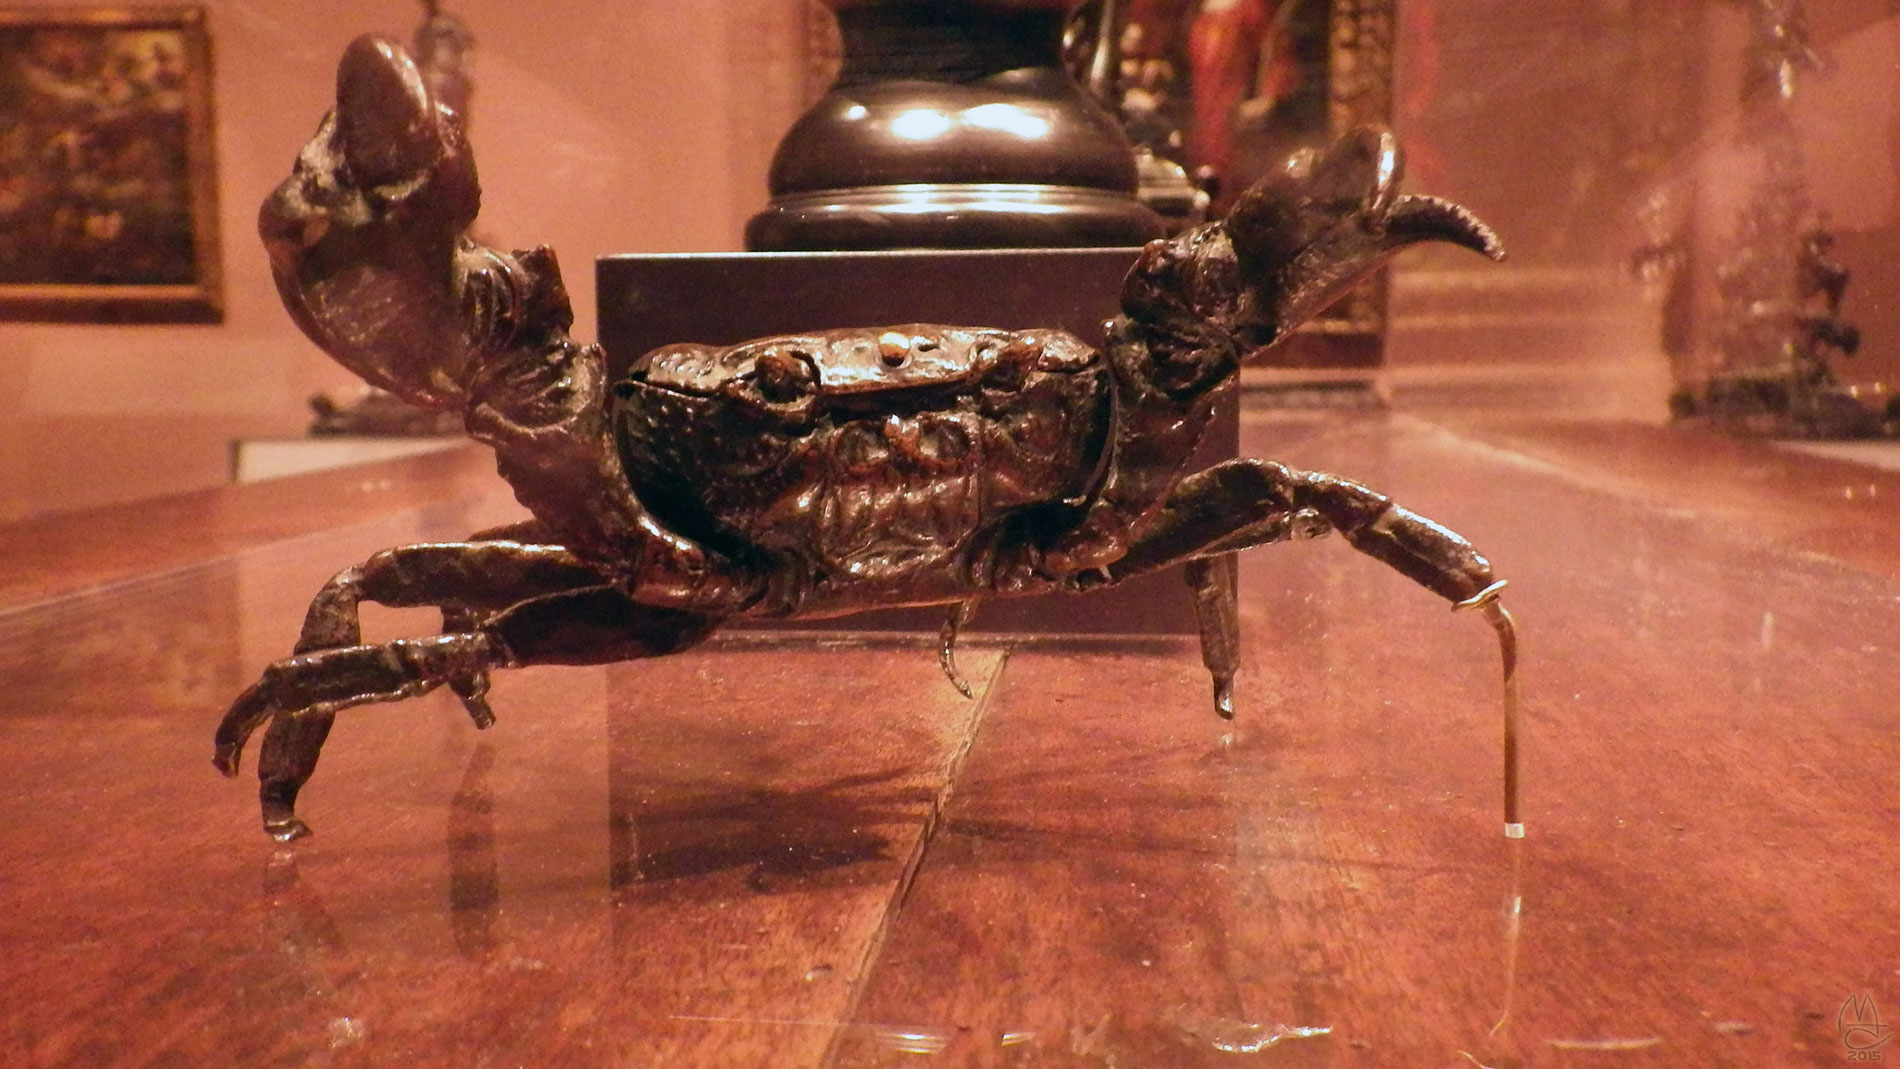 Crab, bronze, about 1500, Italian. Break for lunch, then let's take a drive!